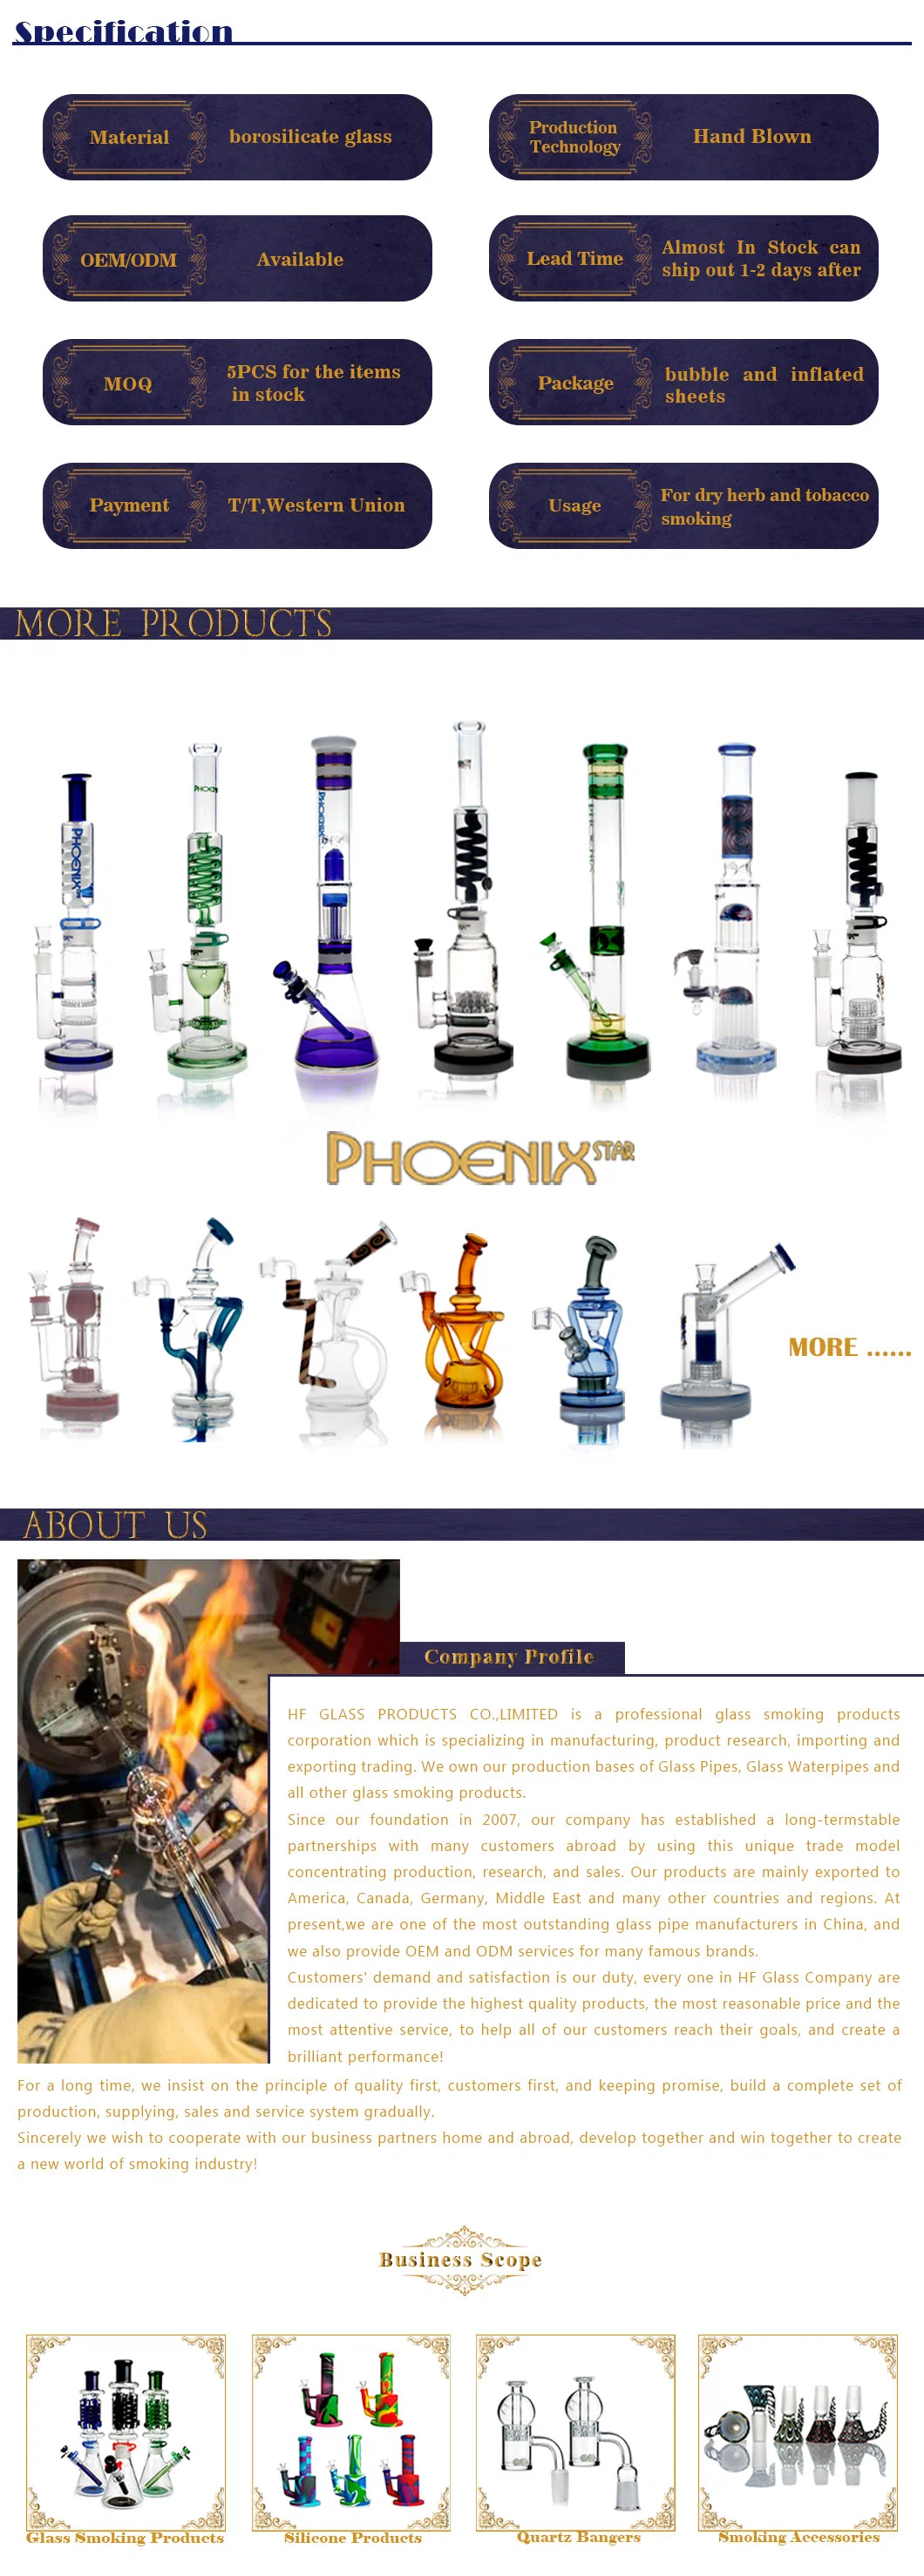 Phoenix Star 11.5 Inches Oil Rig Showerhead Perc Imported American Color Rod Quartz Banger Pipe Smoking Glass Water Pipie Wholesale